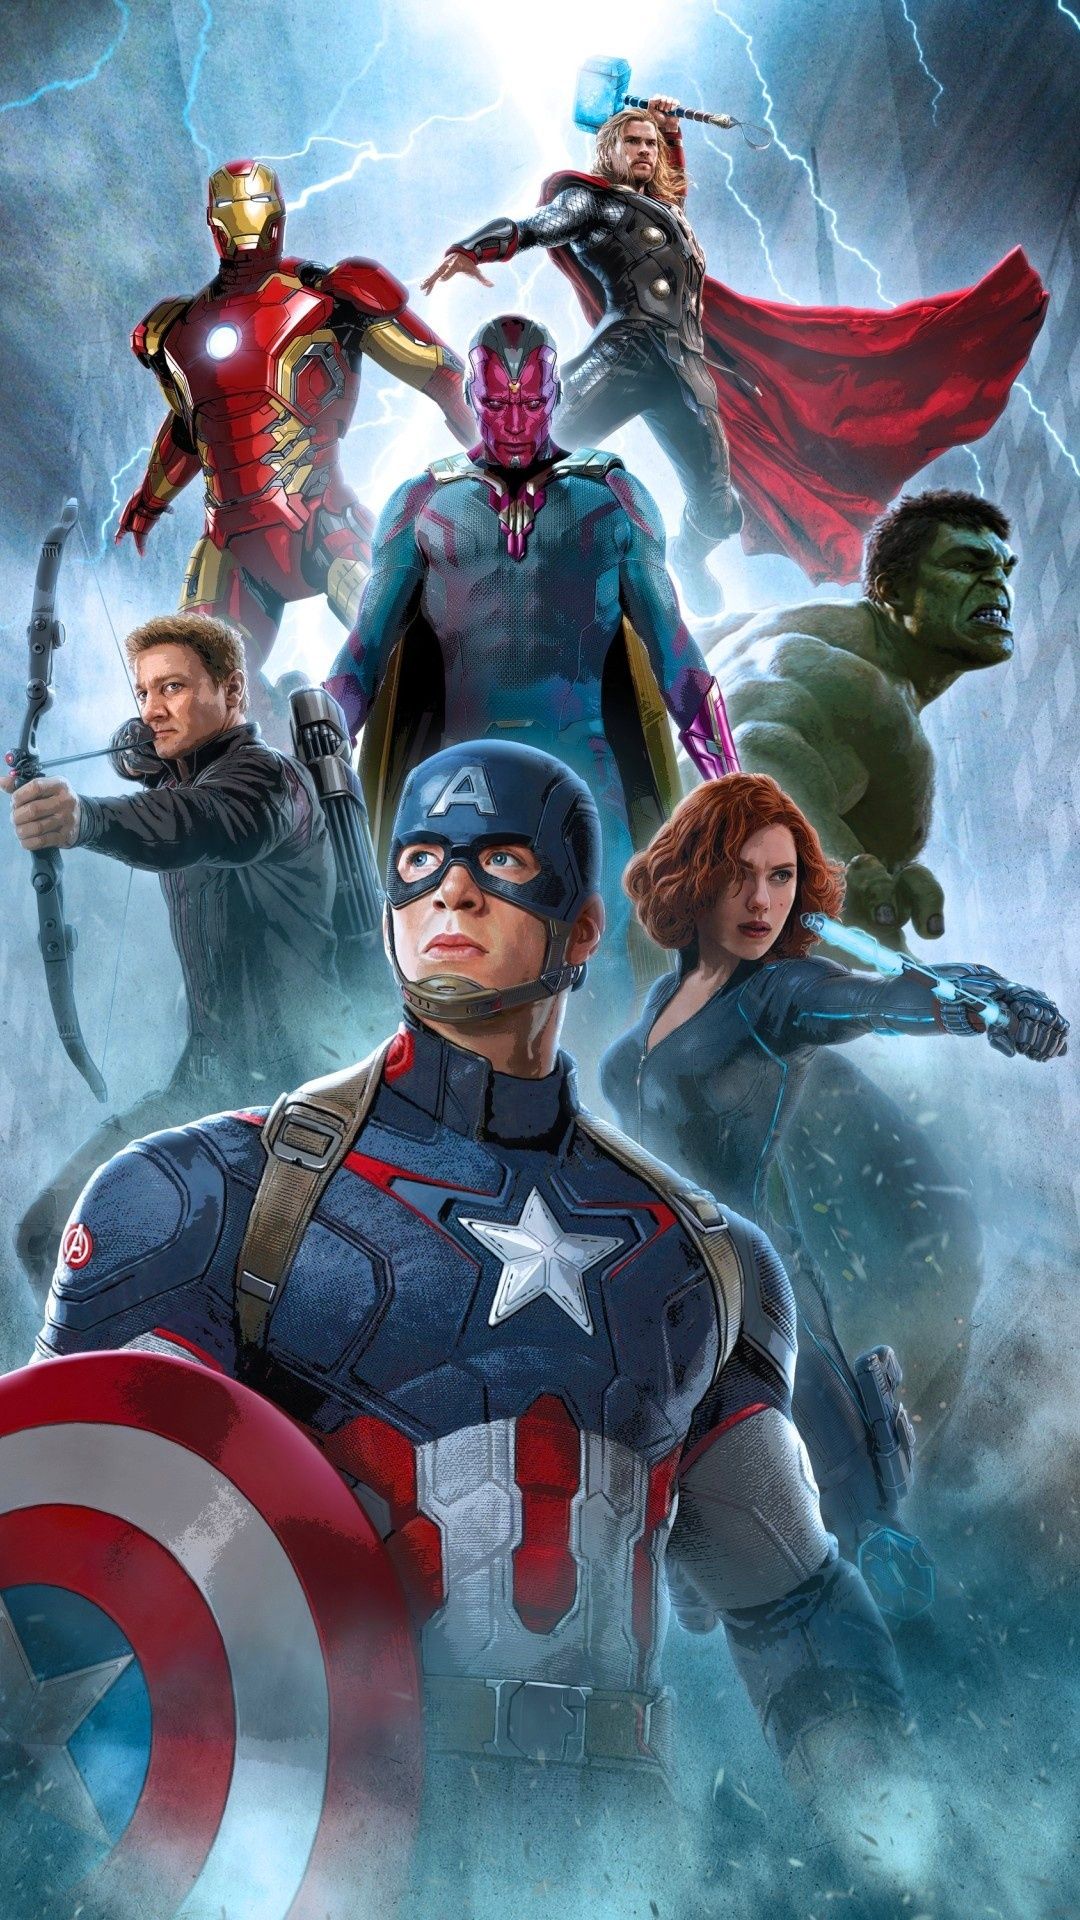 Marvel HD Android Phone Wallpaper